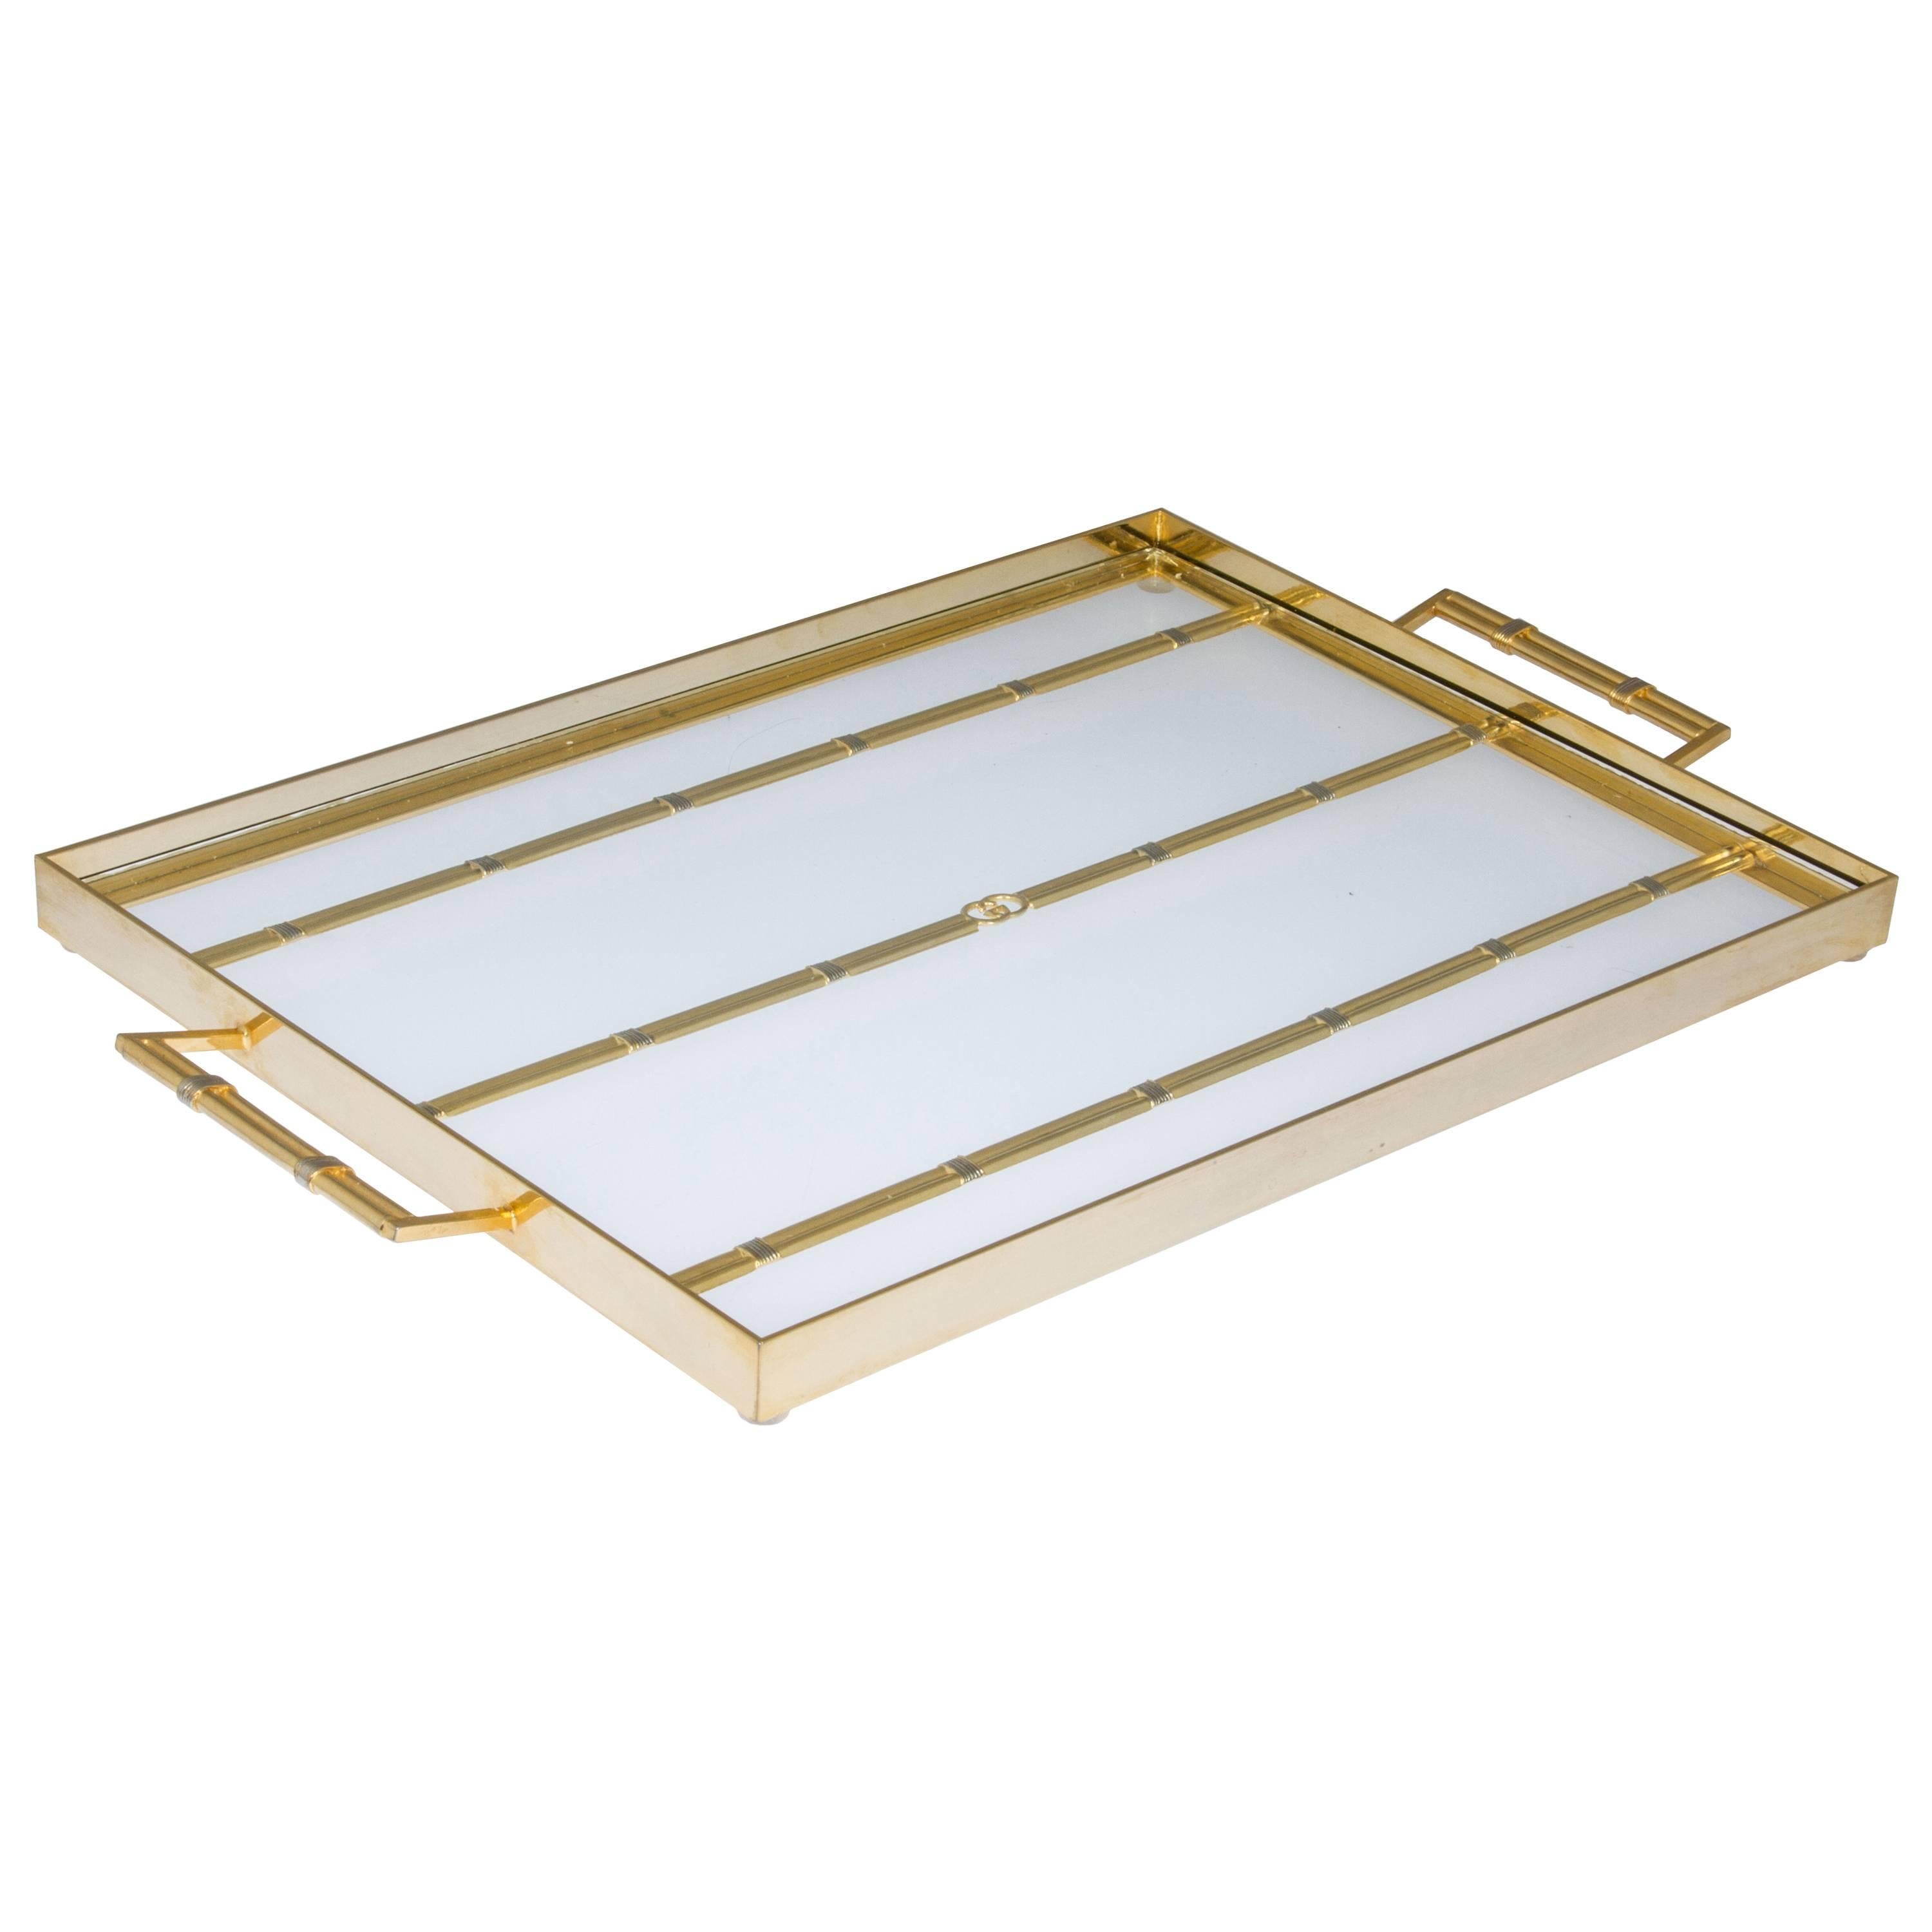 This is a great looking tray having brass accented with silver bands with the Gucci Logo in the center. Great for a vanity, bar or for serving.